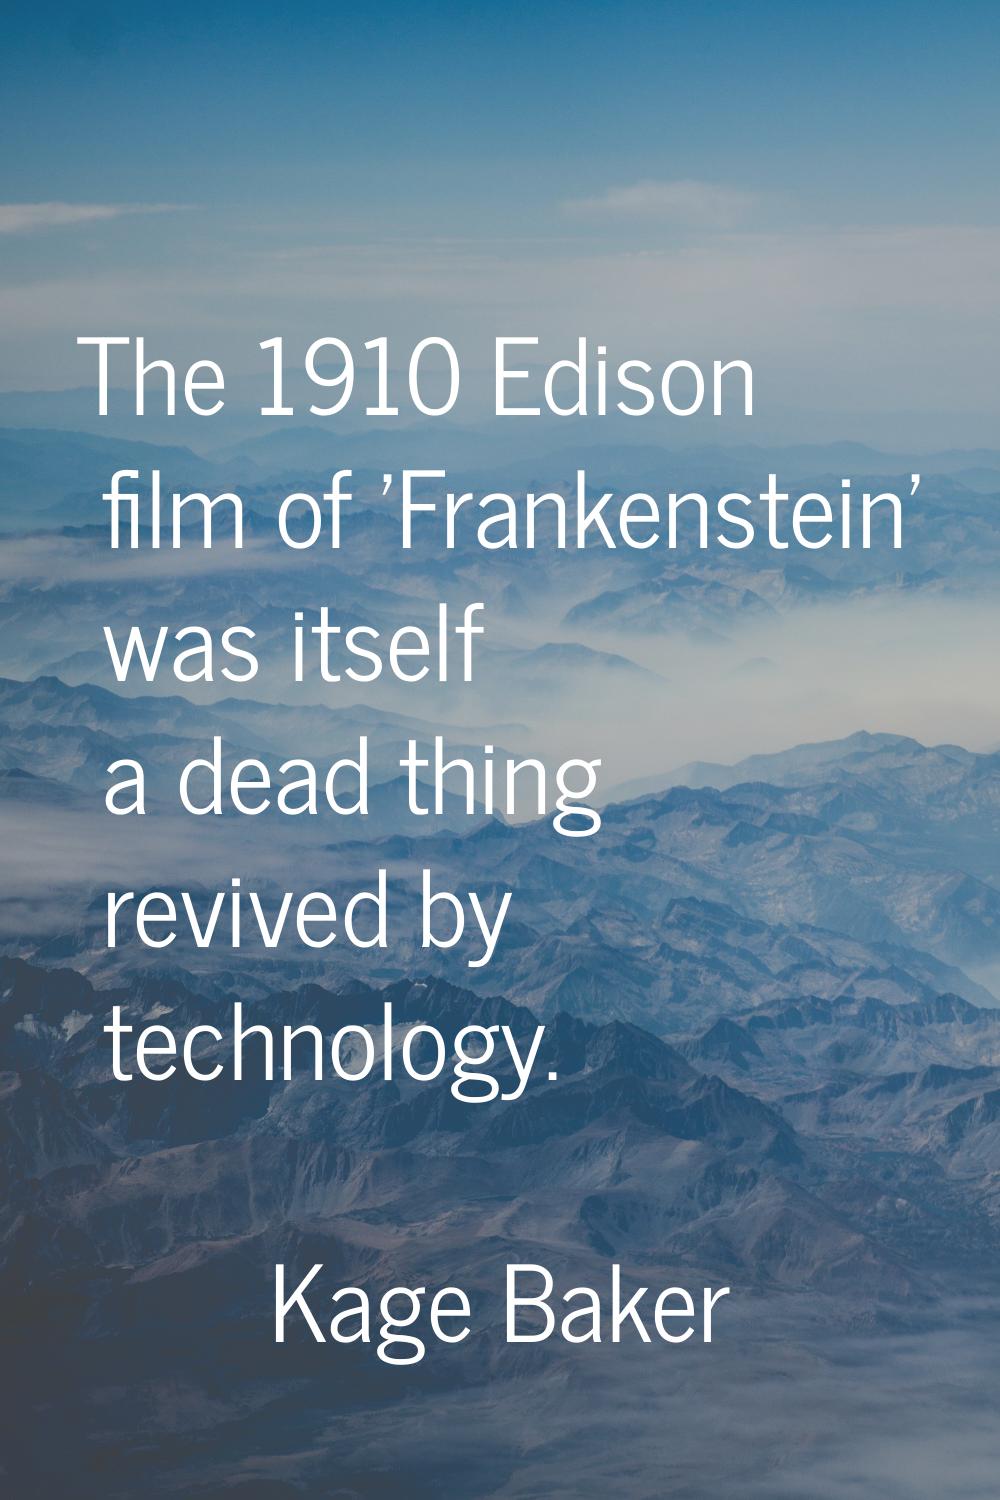 The 1910 Edison film of 'Frankenstein' was itself a dead thing revived by technology.